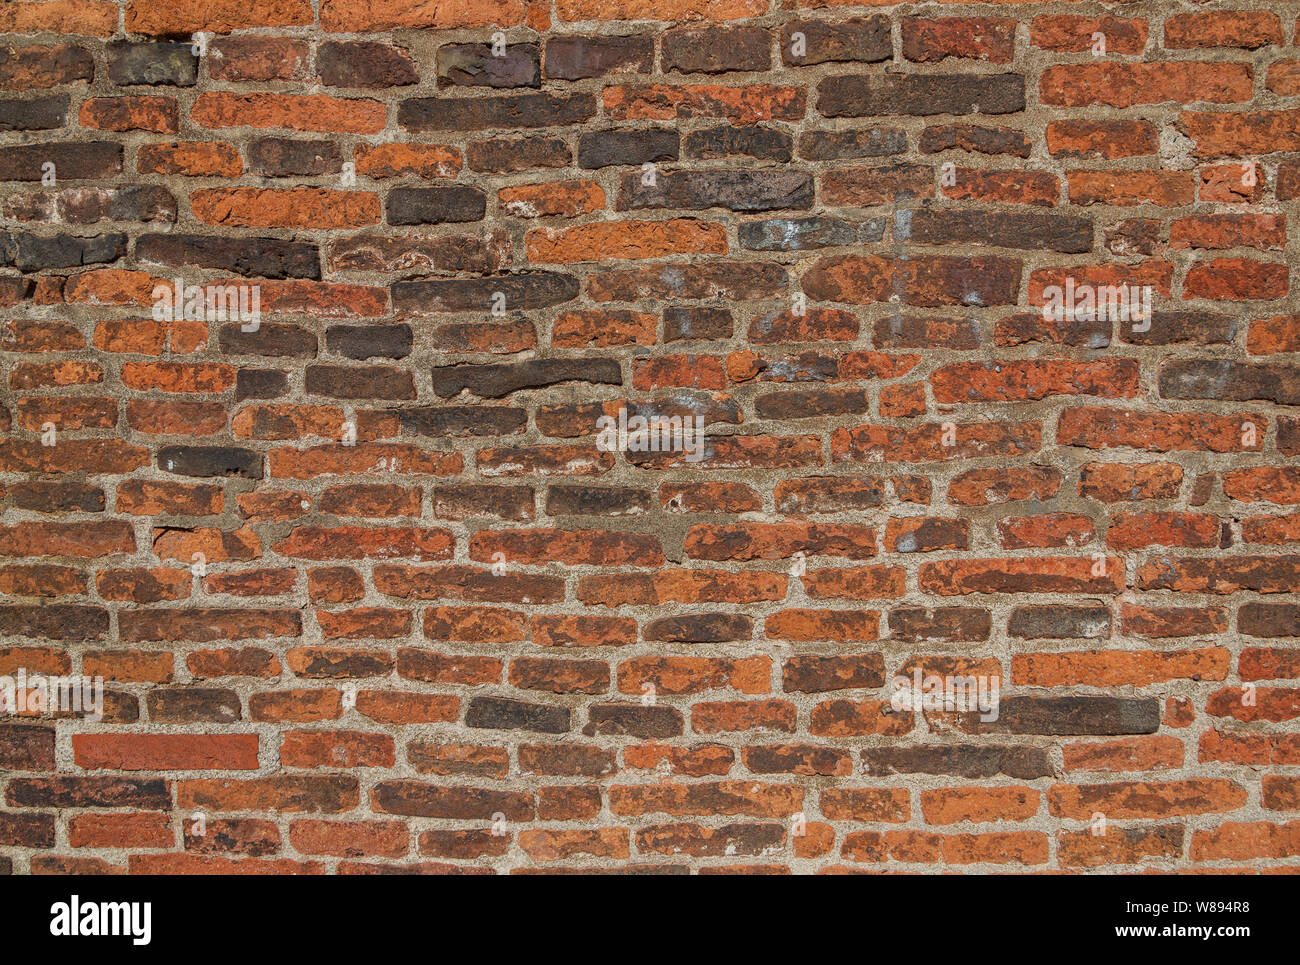 Real vintage Bumpy, rough and old brick texture with imperfect, dilapidate, impair and defective running bond pattern. Stock Photo